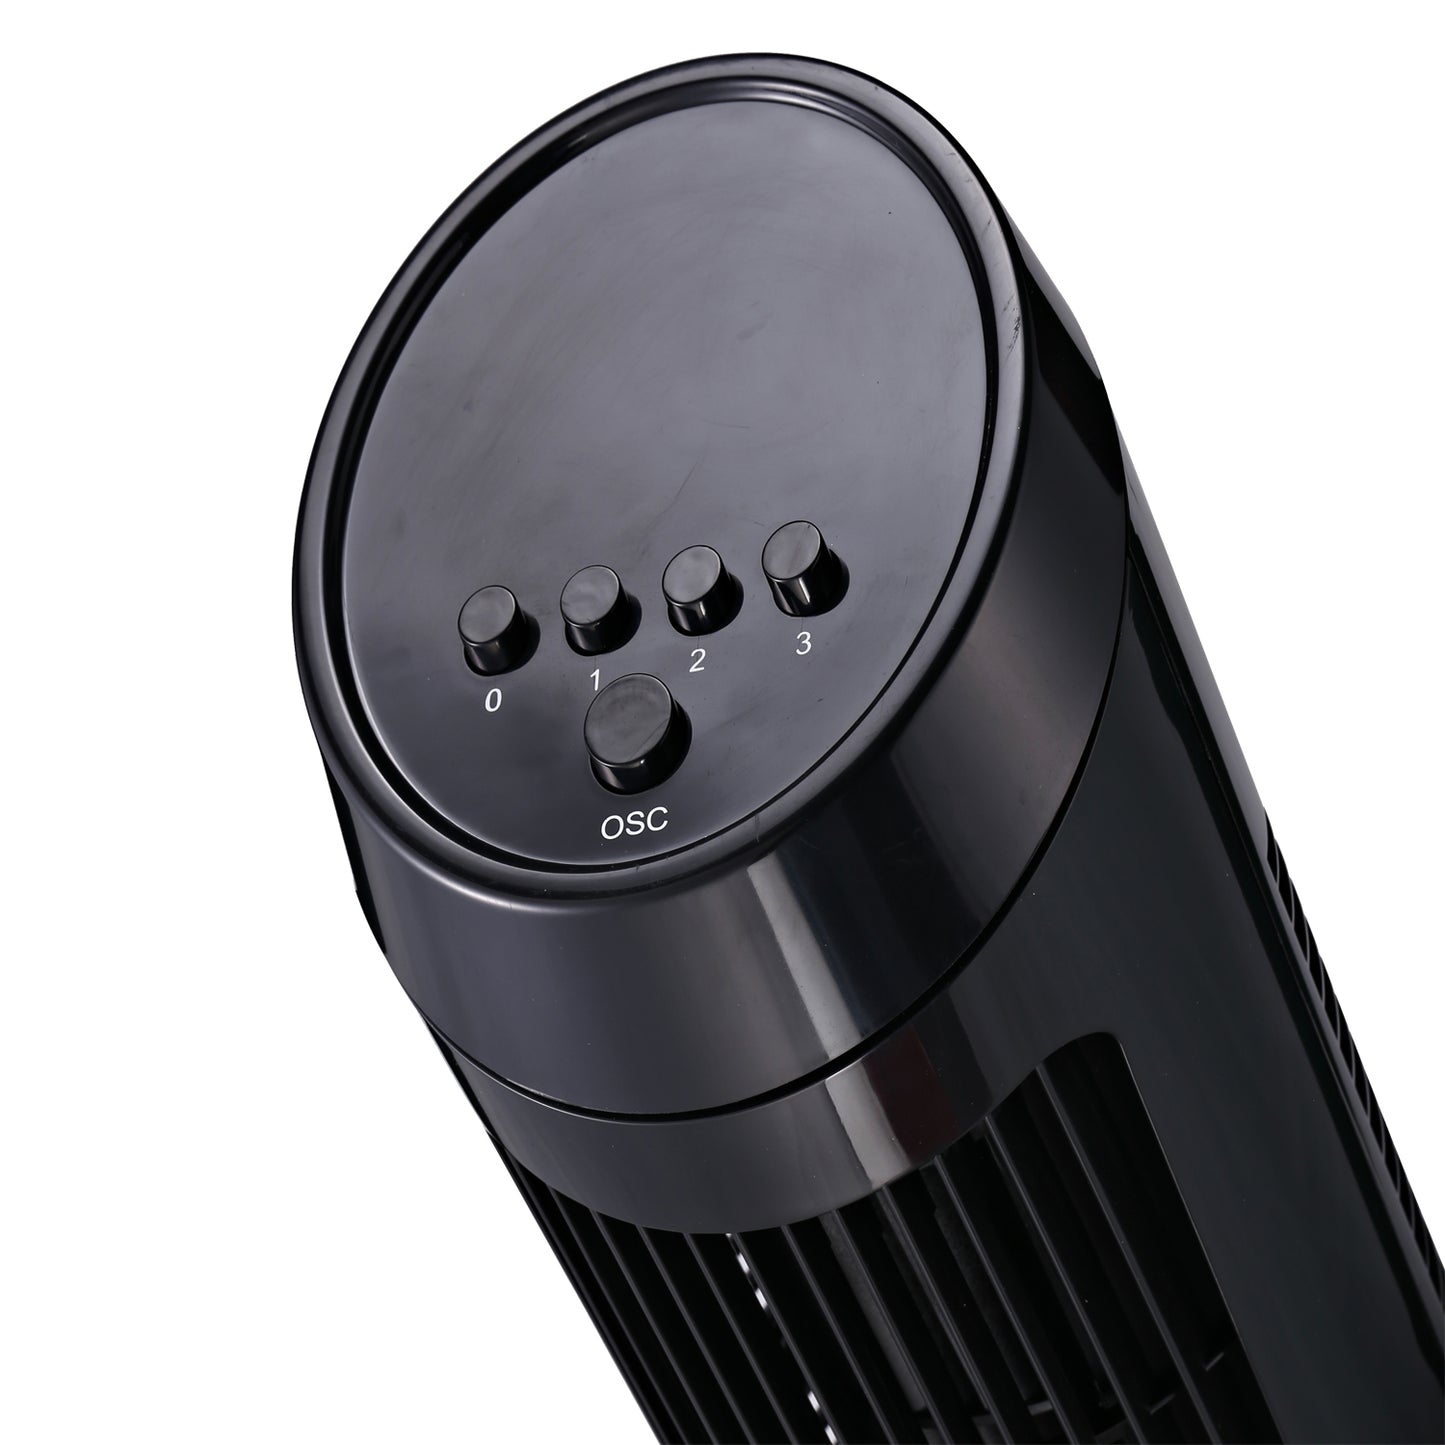 HOMCOM 30" Oscillating Tower Fan 3 Speed Mode Ultra Slim Indoor Air Refresher Cooling Machine Noise Reduction - Black